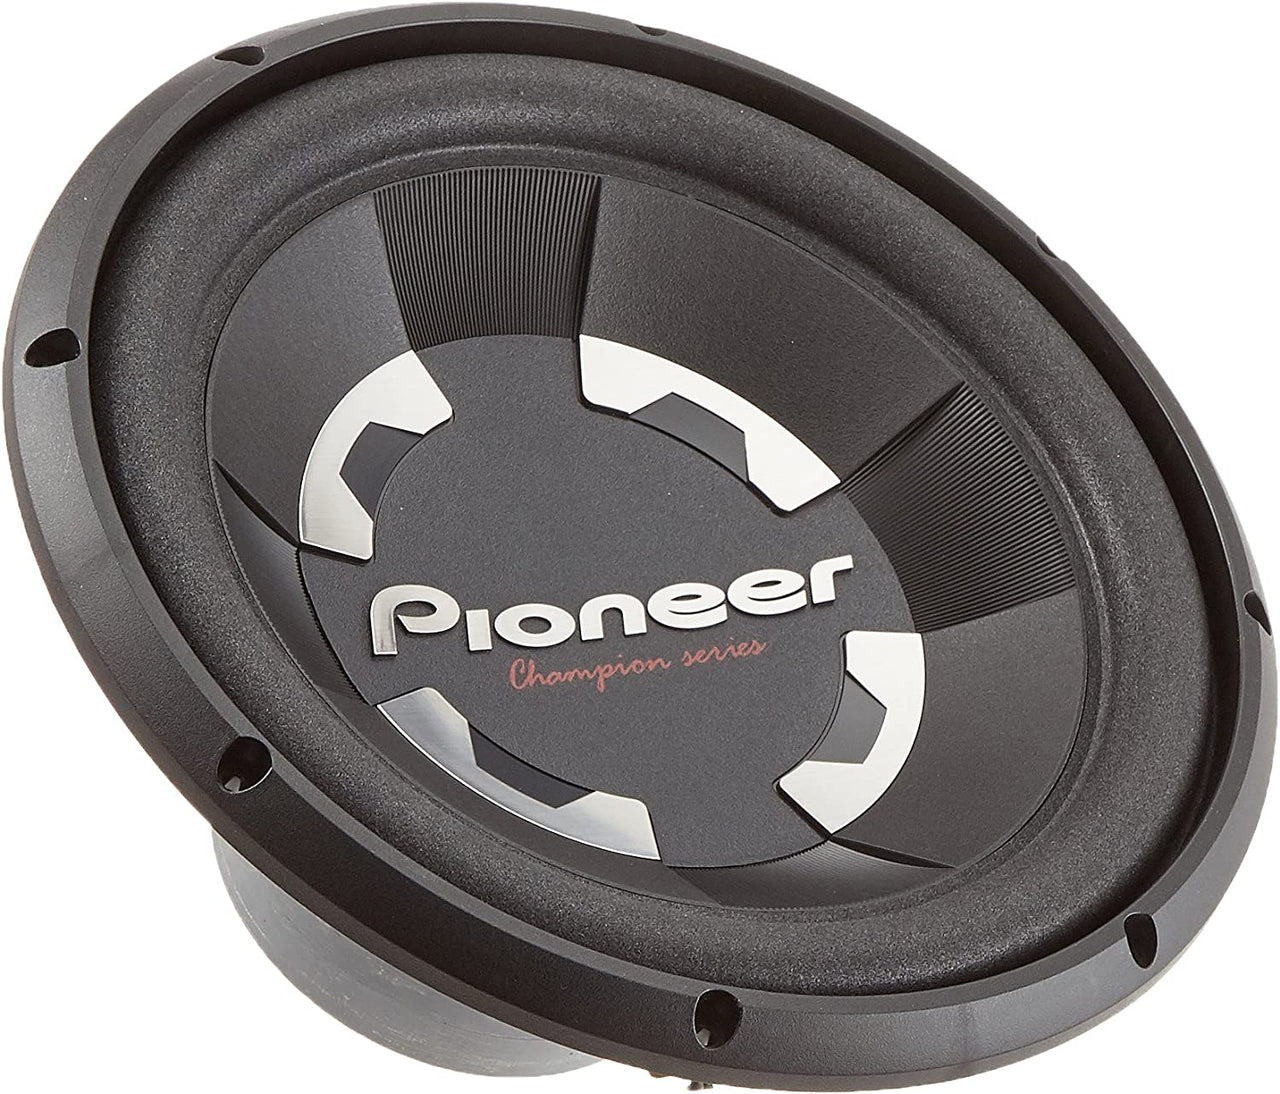 2 X Pioneer TS-300D4 12 Inch 1400 Watts Max Power Dual 4-Ohm Voice Coil Car Audio Stereo Subwoofer Loudspeakers